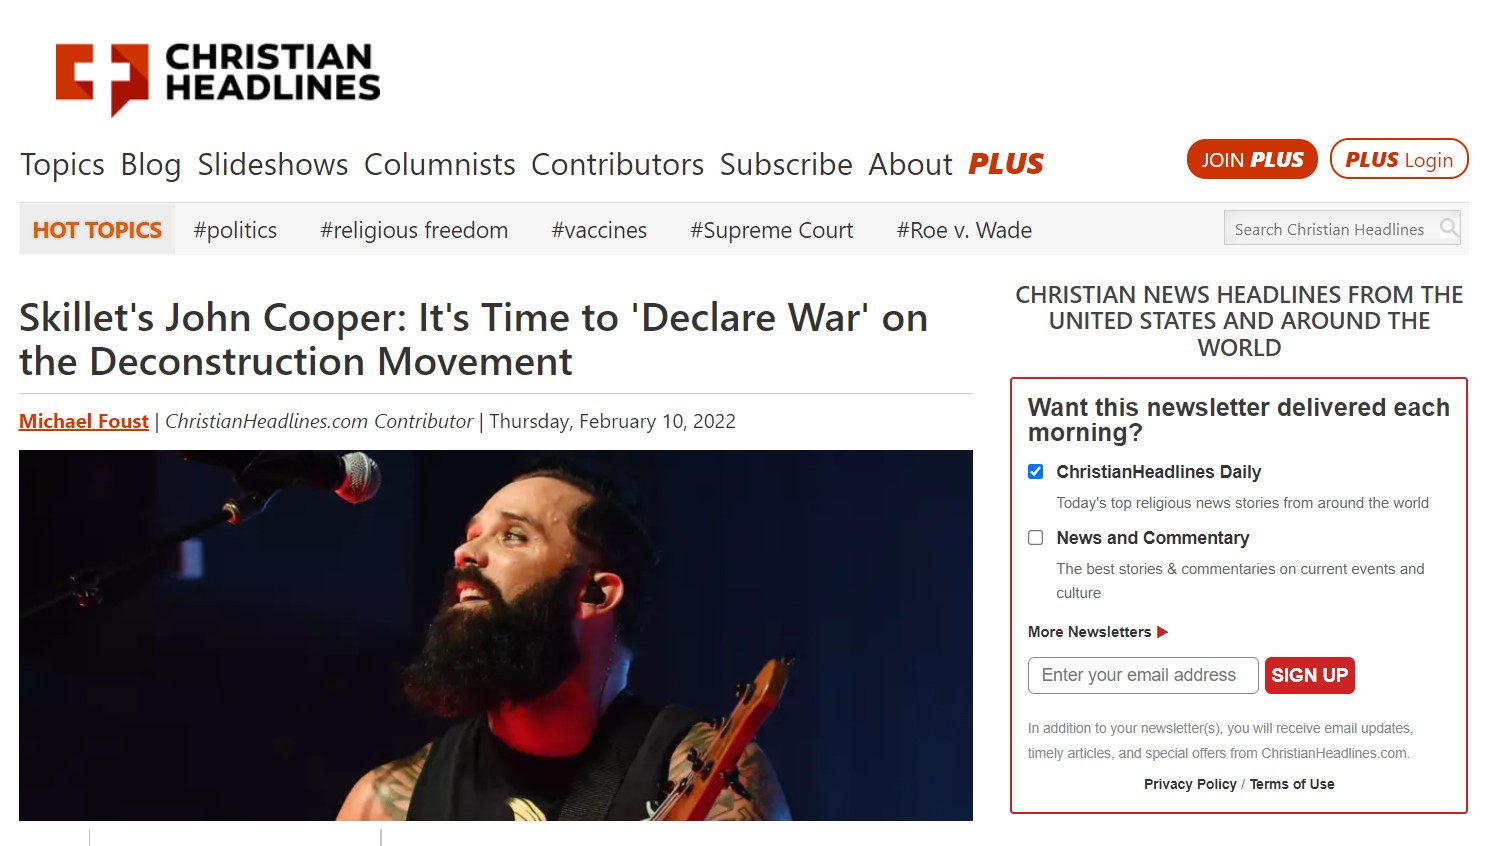 Screenshort of story from ChristianHeadlines.com - Skillet's John Cooper: It's Time to 'Declare War' on the Deconstruction Movement